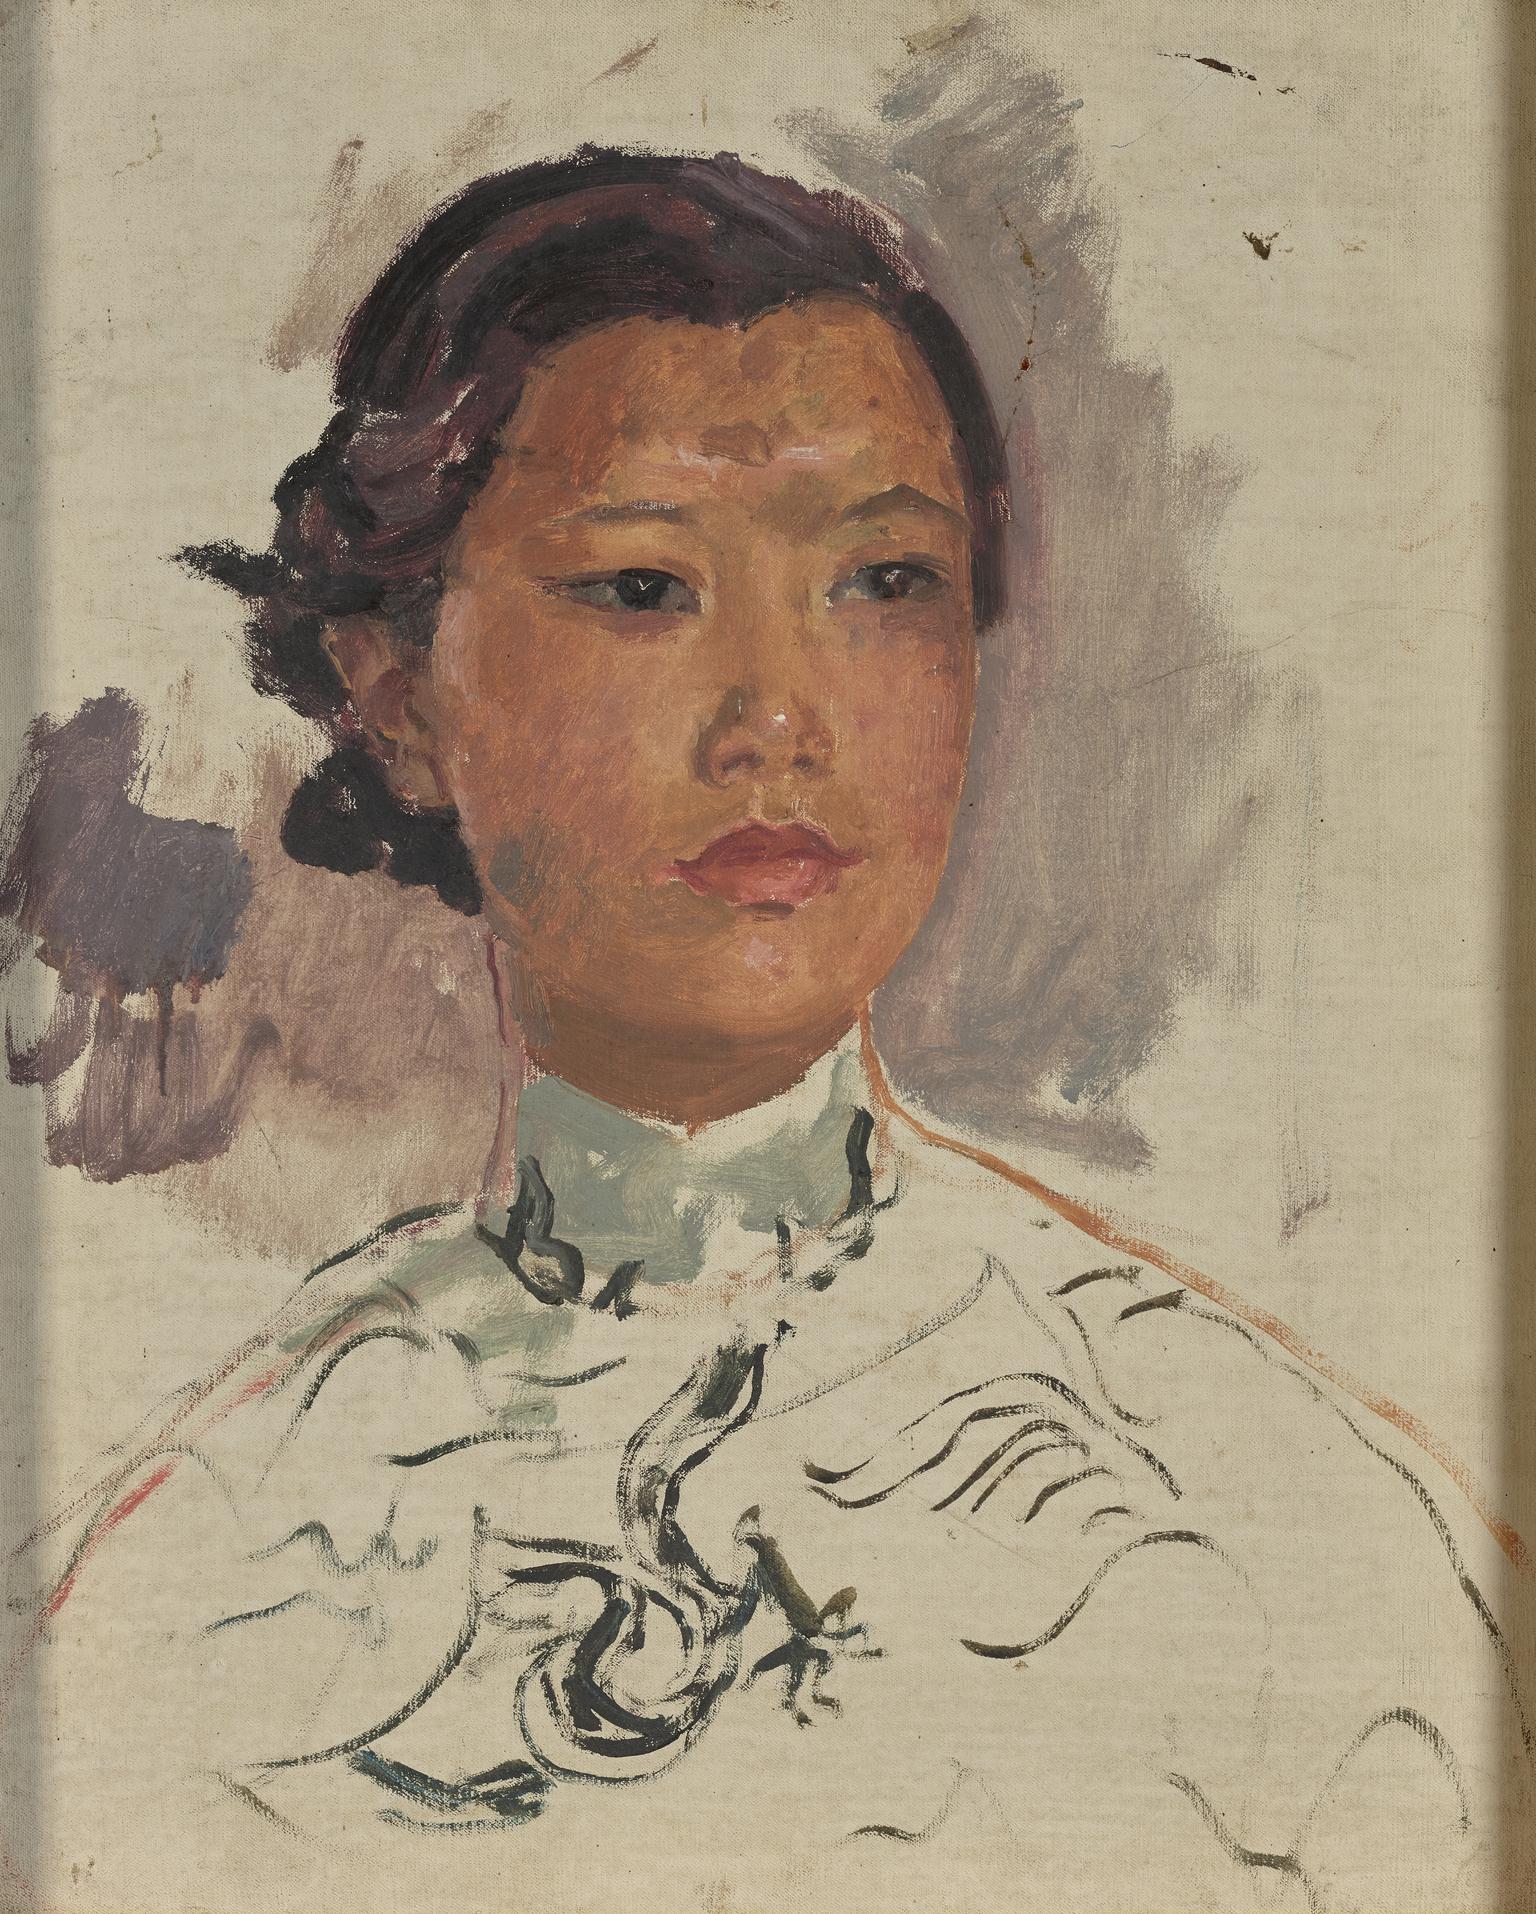 Portrait of a Chinese woman